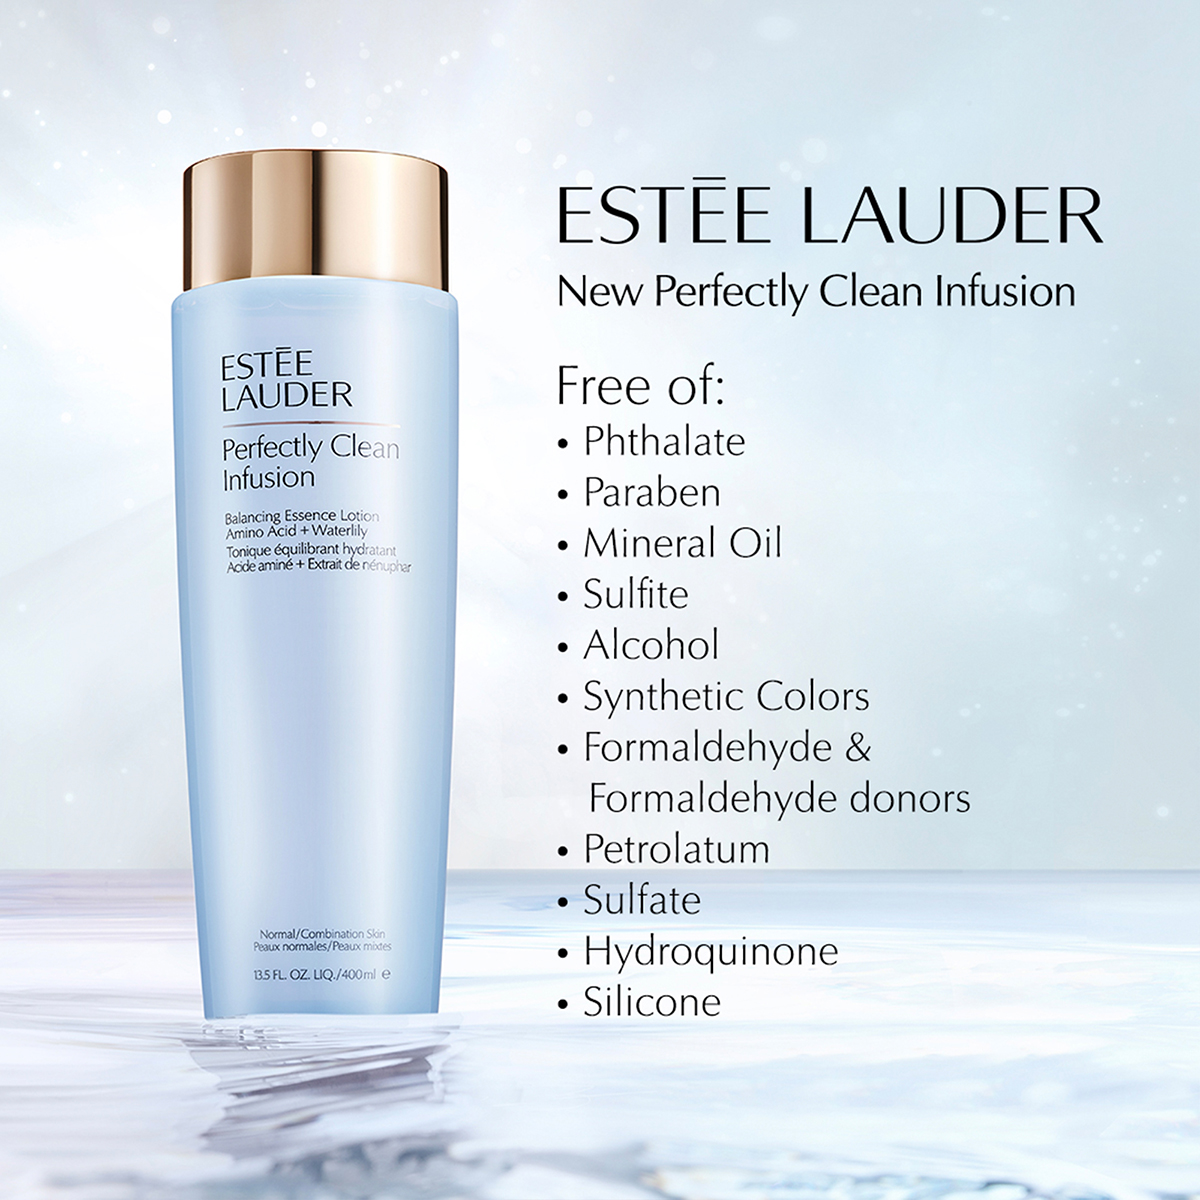 Estee Lauder(tm) Perfectly Clean Infusion Balancing Treatment Lotion